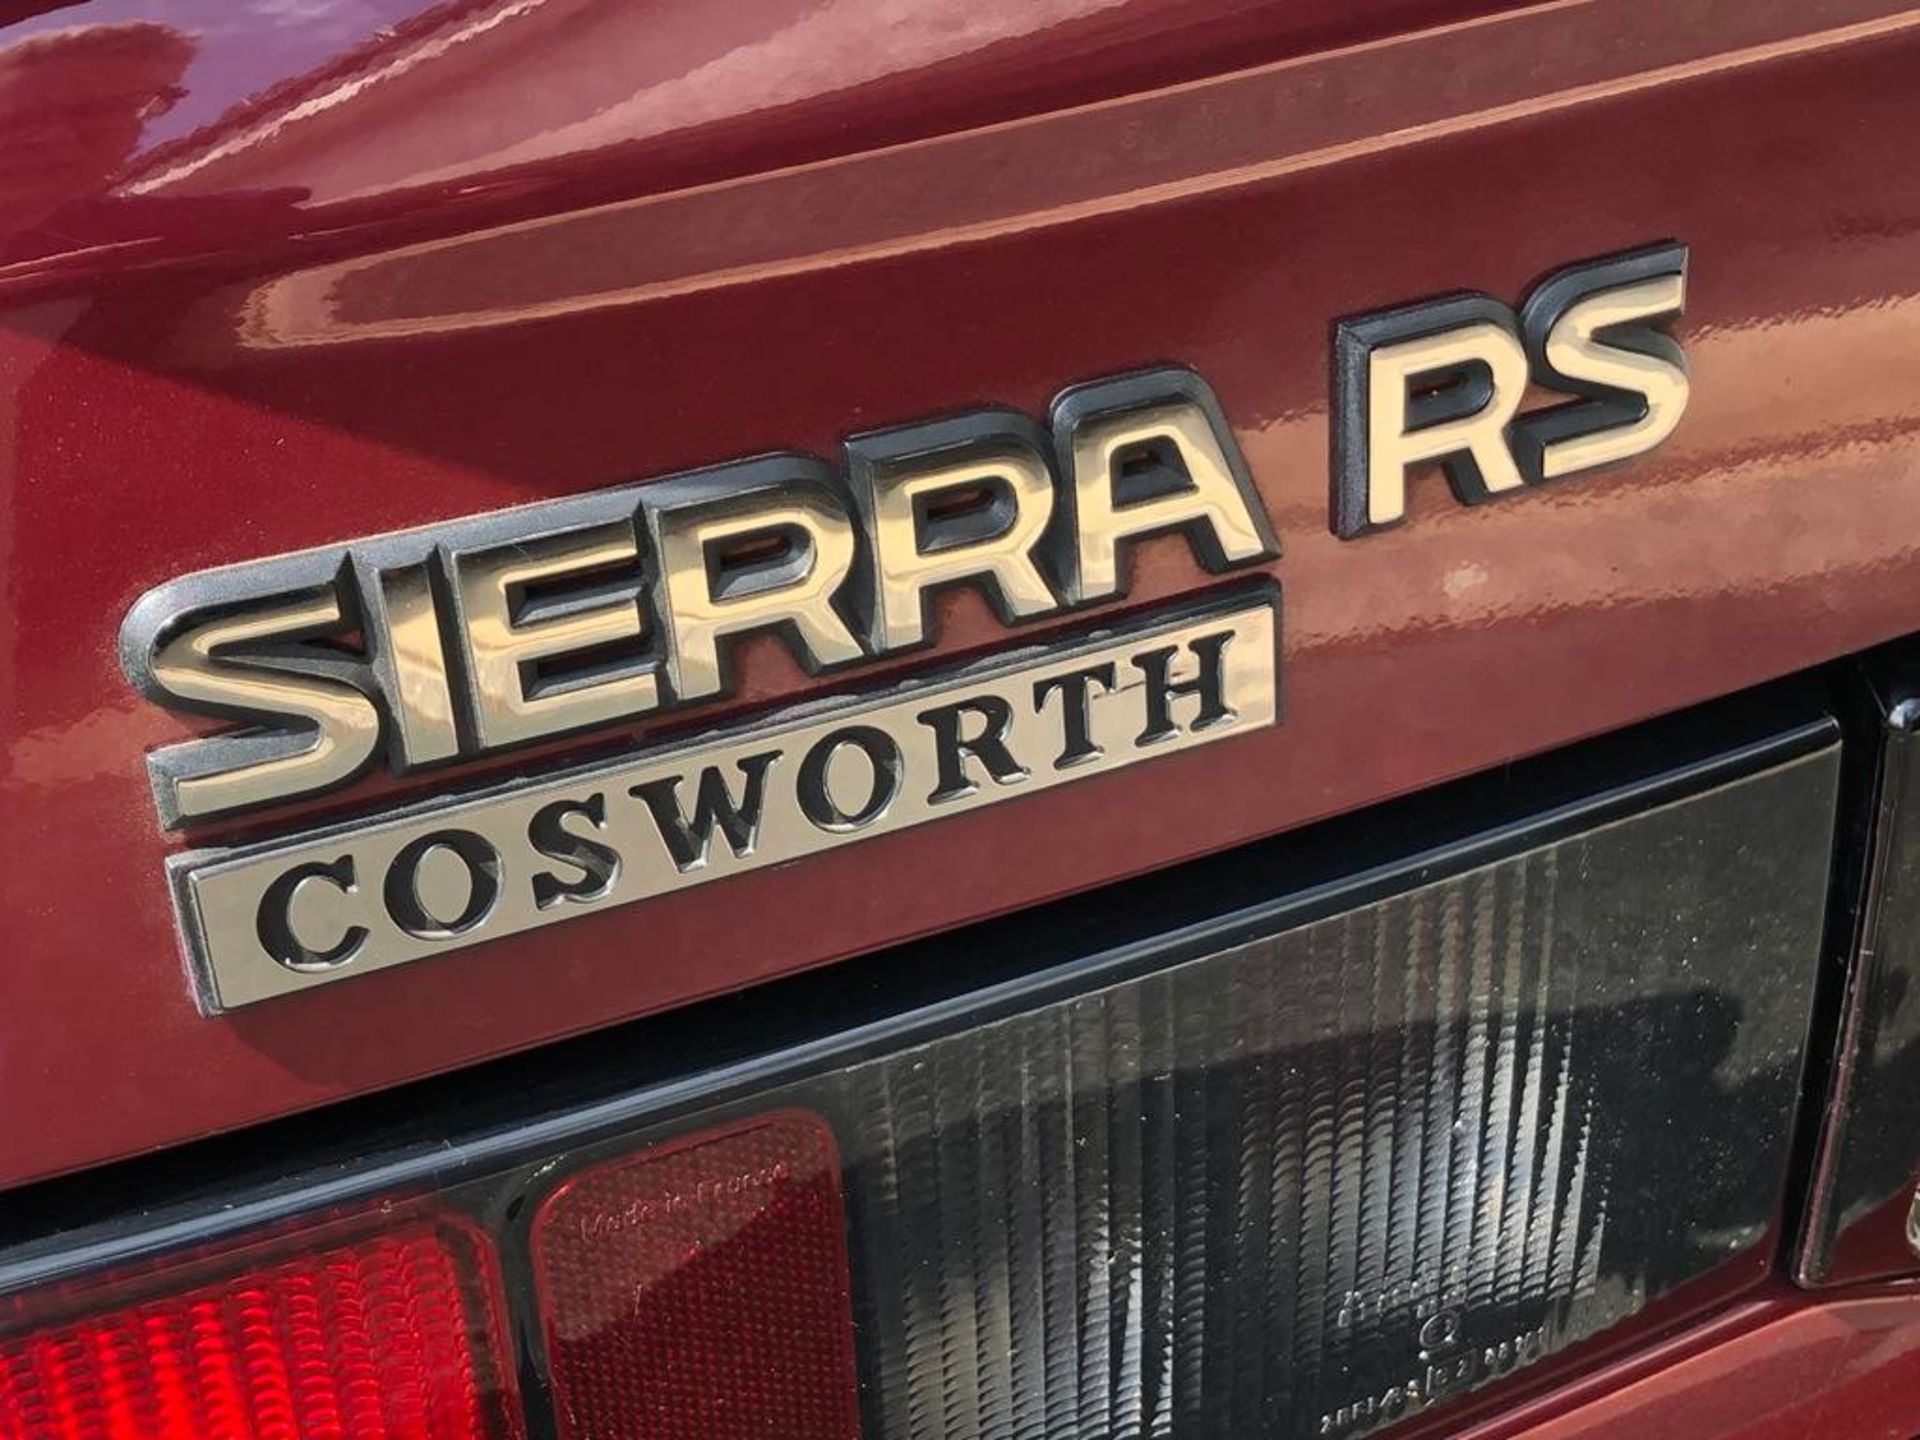 1992 Ford Sierra Sapphire Cosworth 4x4 Registration number K813 PCM Nouveau red, Recaro seats Bought - Image 11 of 128